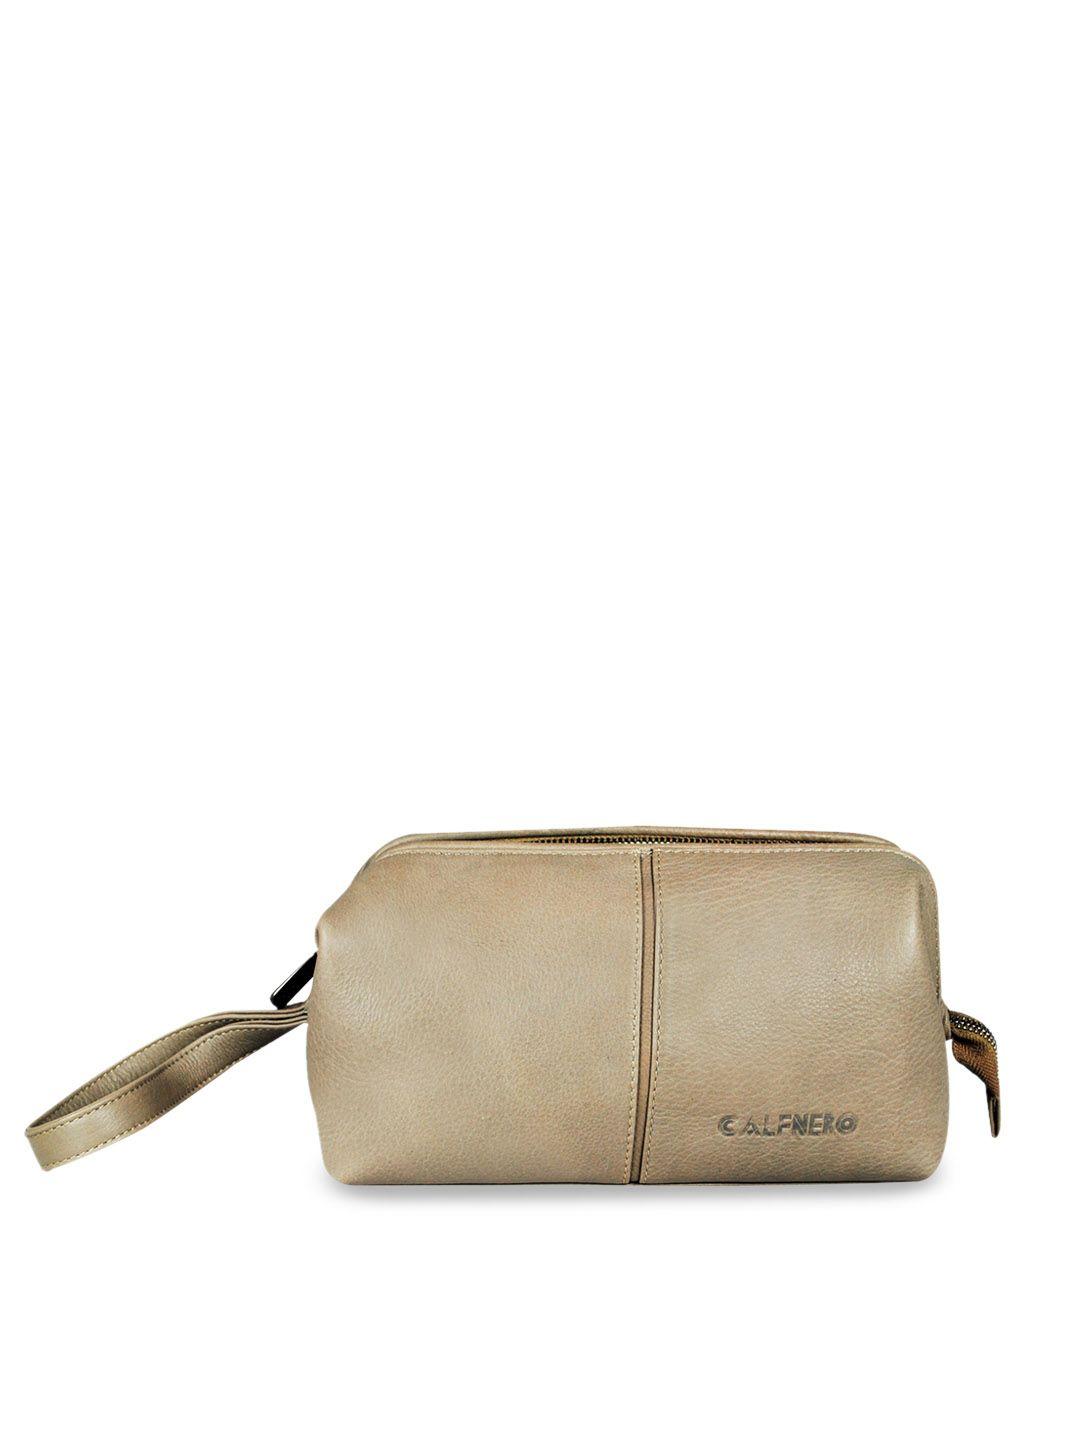 calfnero leather travel pouch